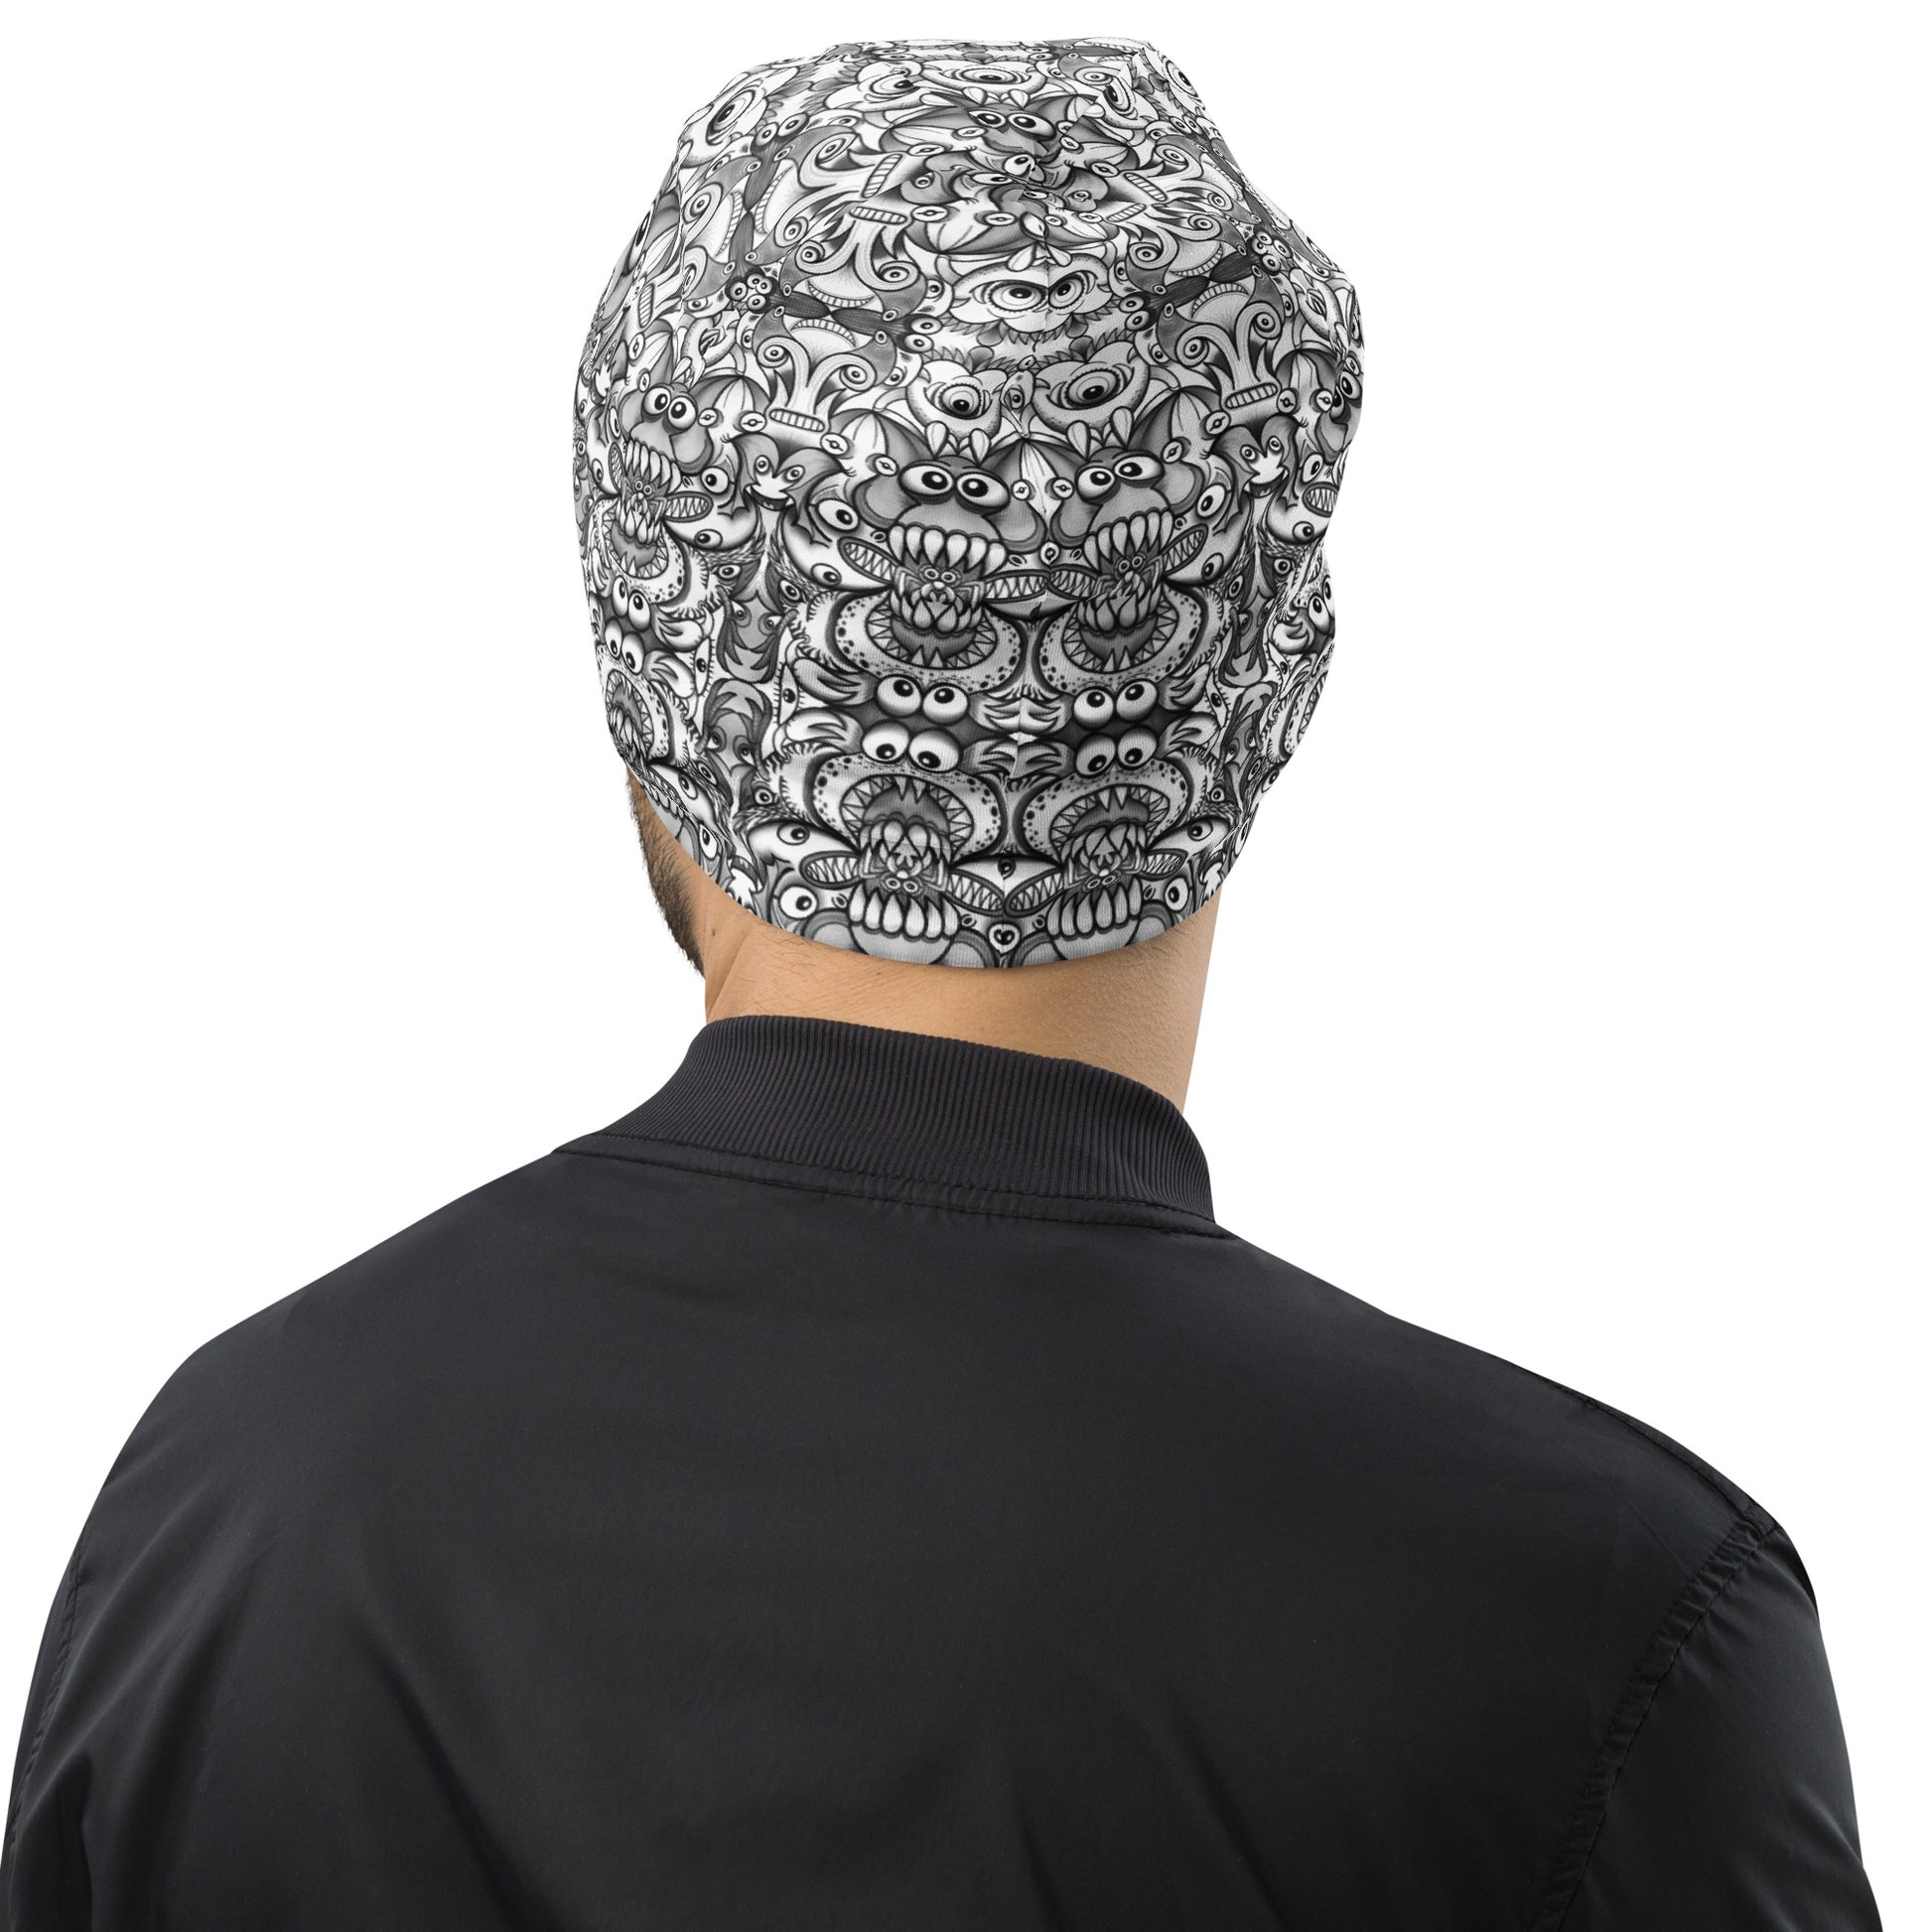 Official pic of the monsters annual convention All-Over Print Beanie. Back view